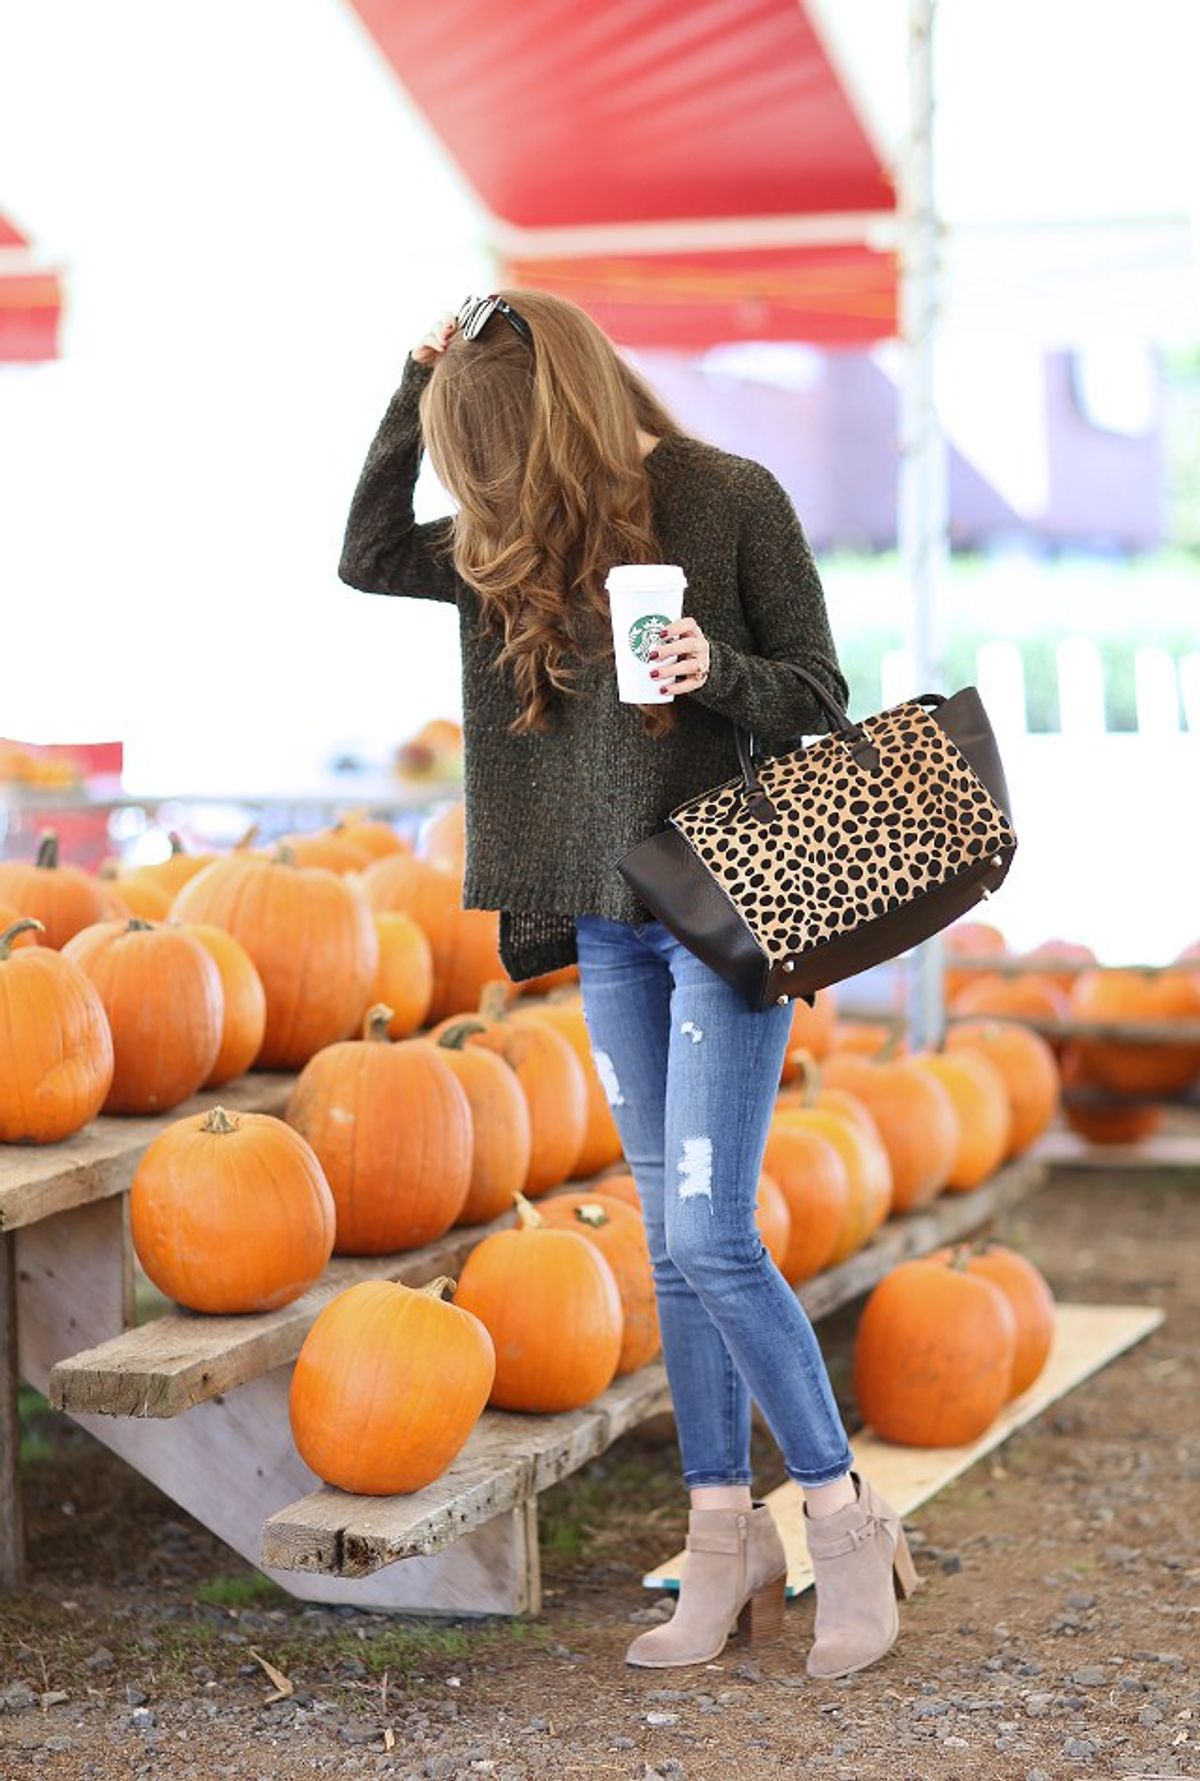 12 Fall Items Every Girl Needs In Her Wardrobe And How To Style Them